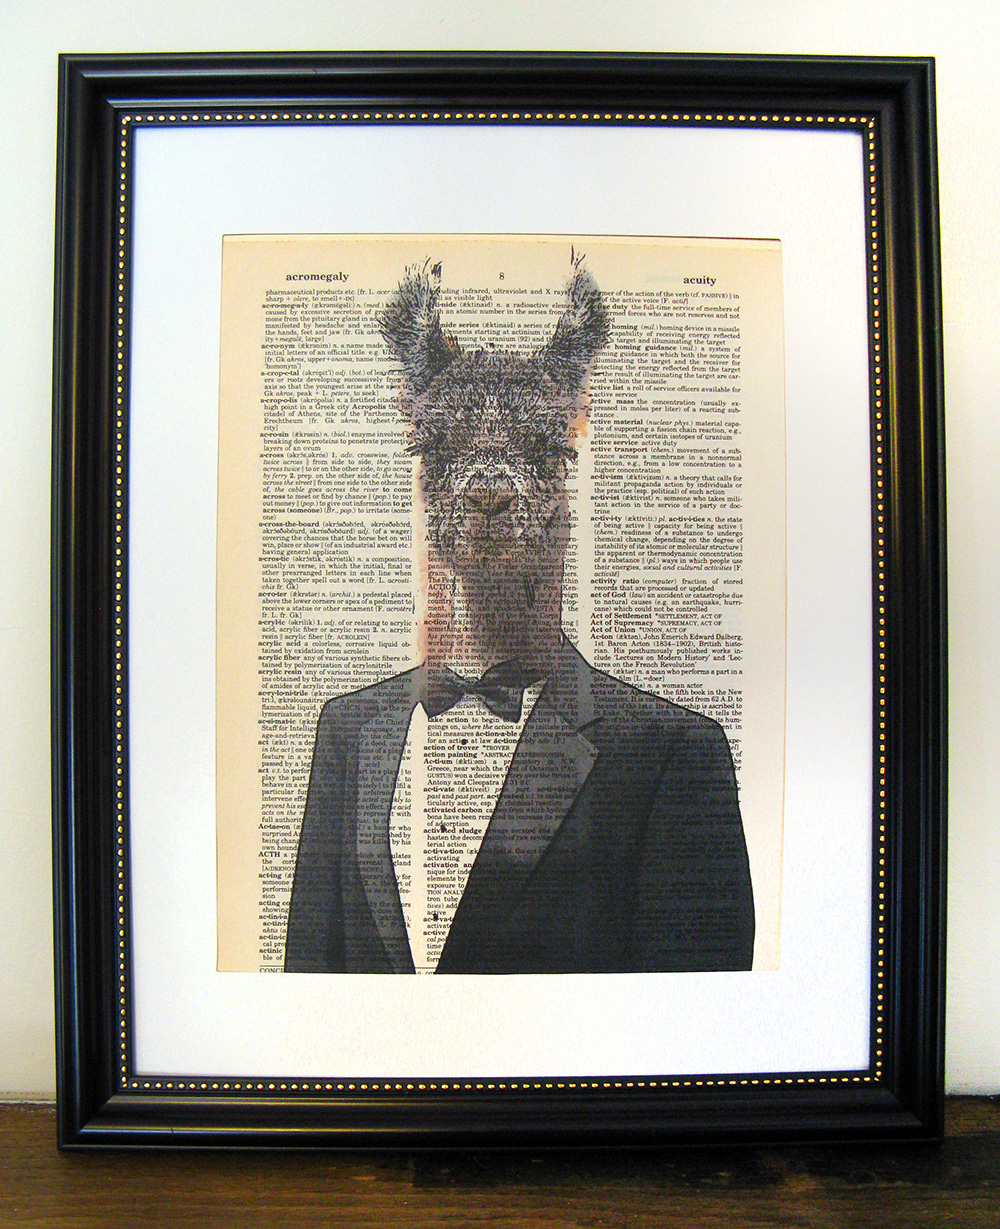 Screenprint of a llama in a tuxedo. The paper is a page from the dictionary.